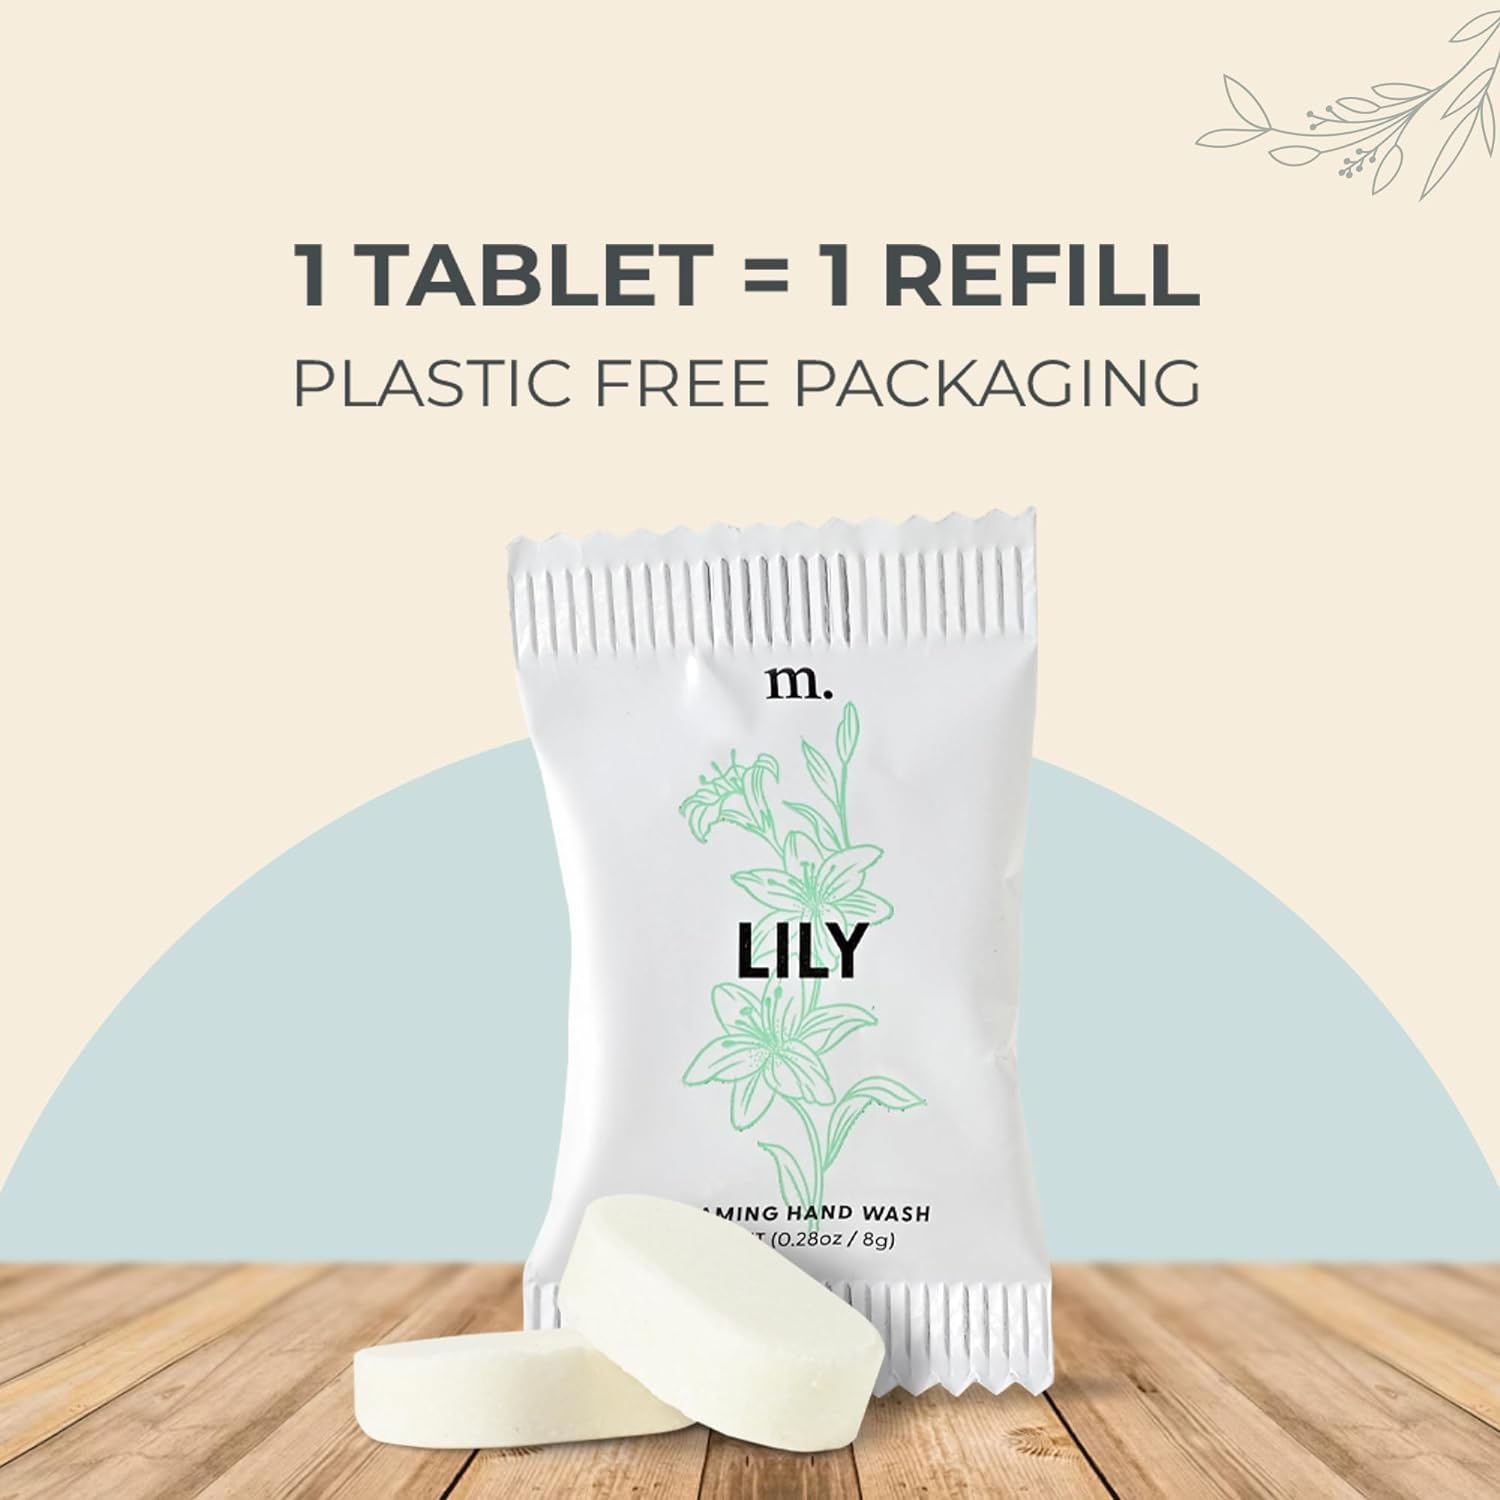 Foaming Hand Soap Tablets Lily x 12